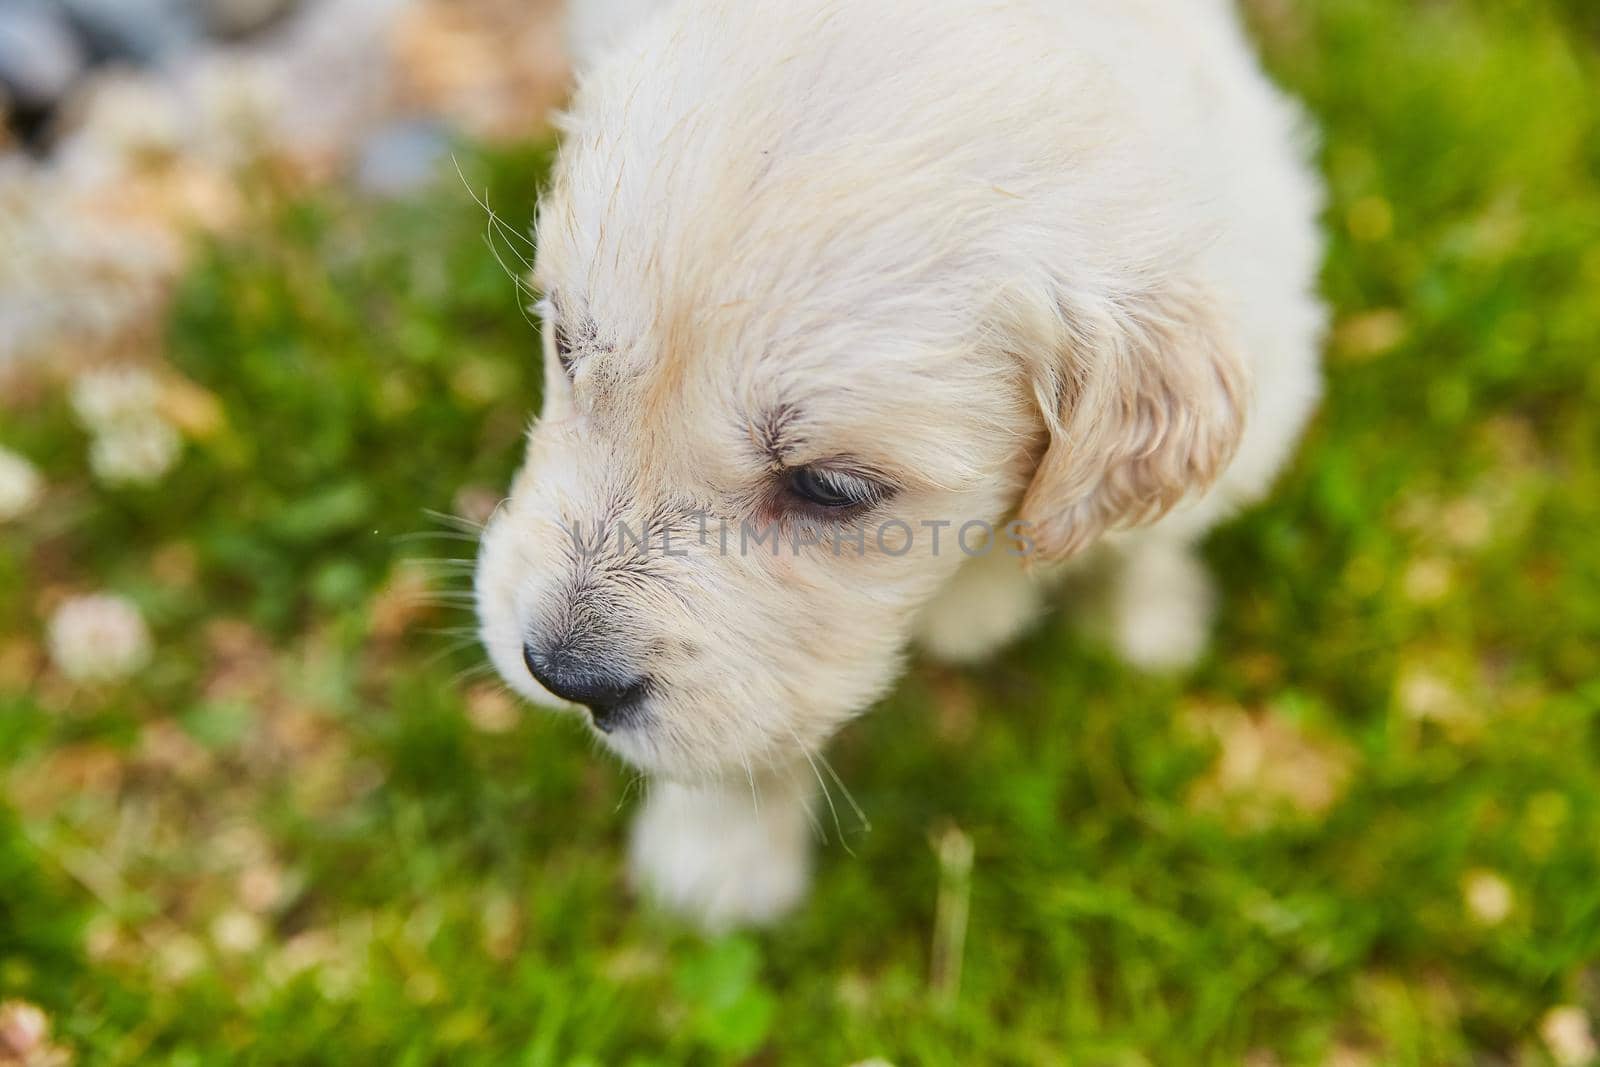 Cute golden retriever from above in grass with detail of face by njproductions